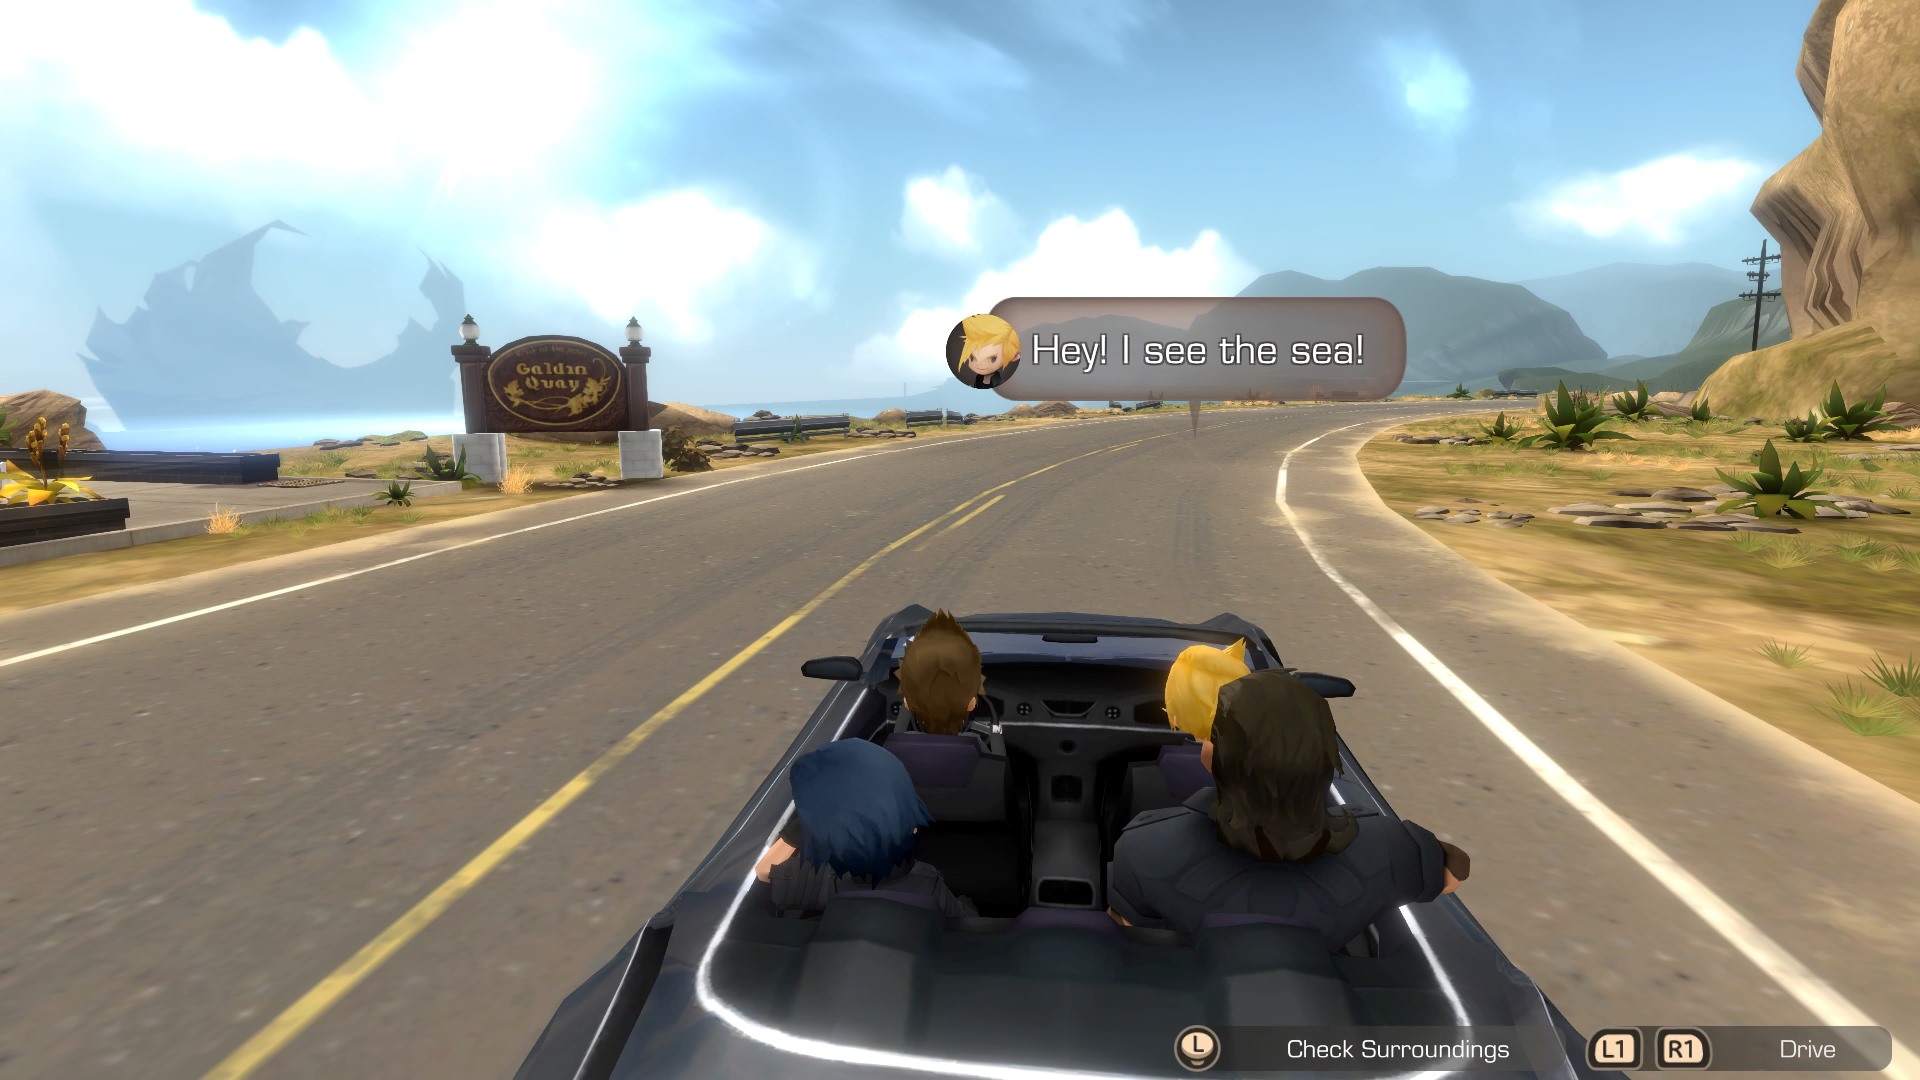 Final Fantasy XV: Pocket Edition HD icon appears on PlayStation